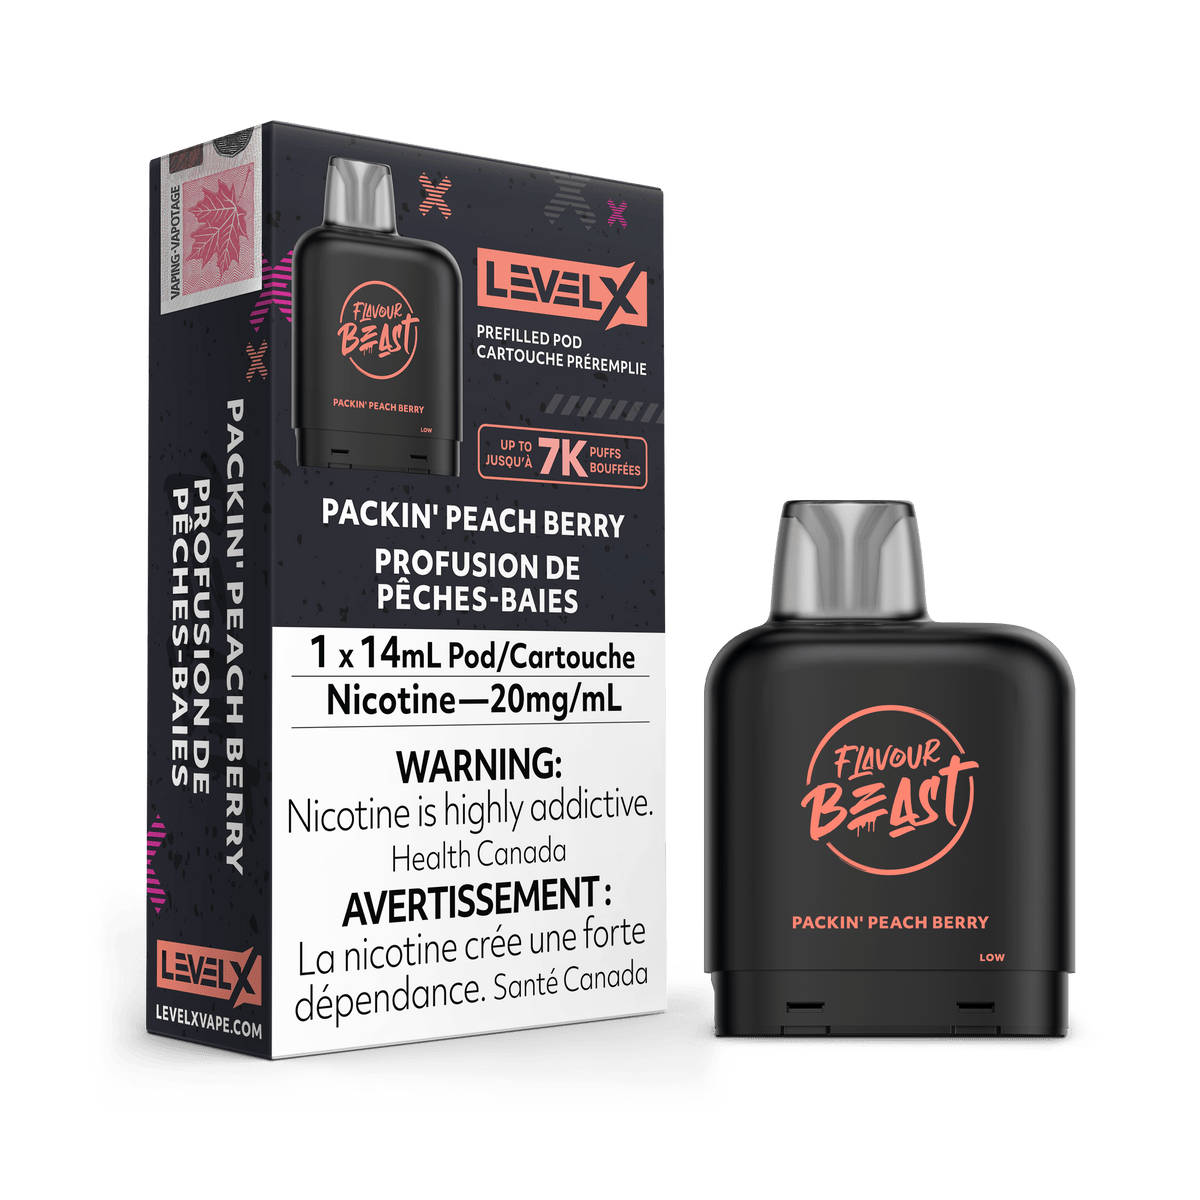 Flavour Beast Level X Pod - Packin' Peach Berry available on Canada online vape shop